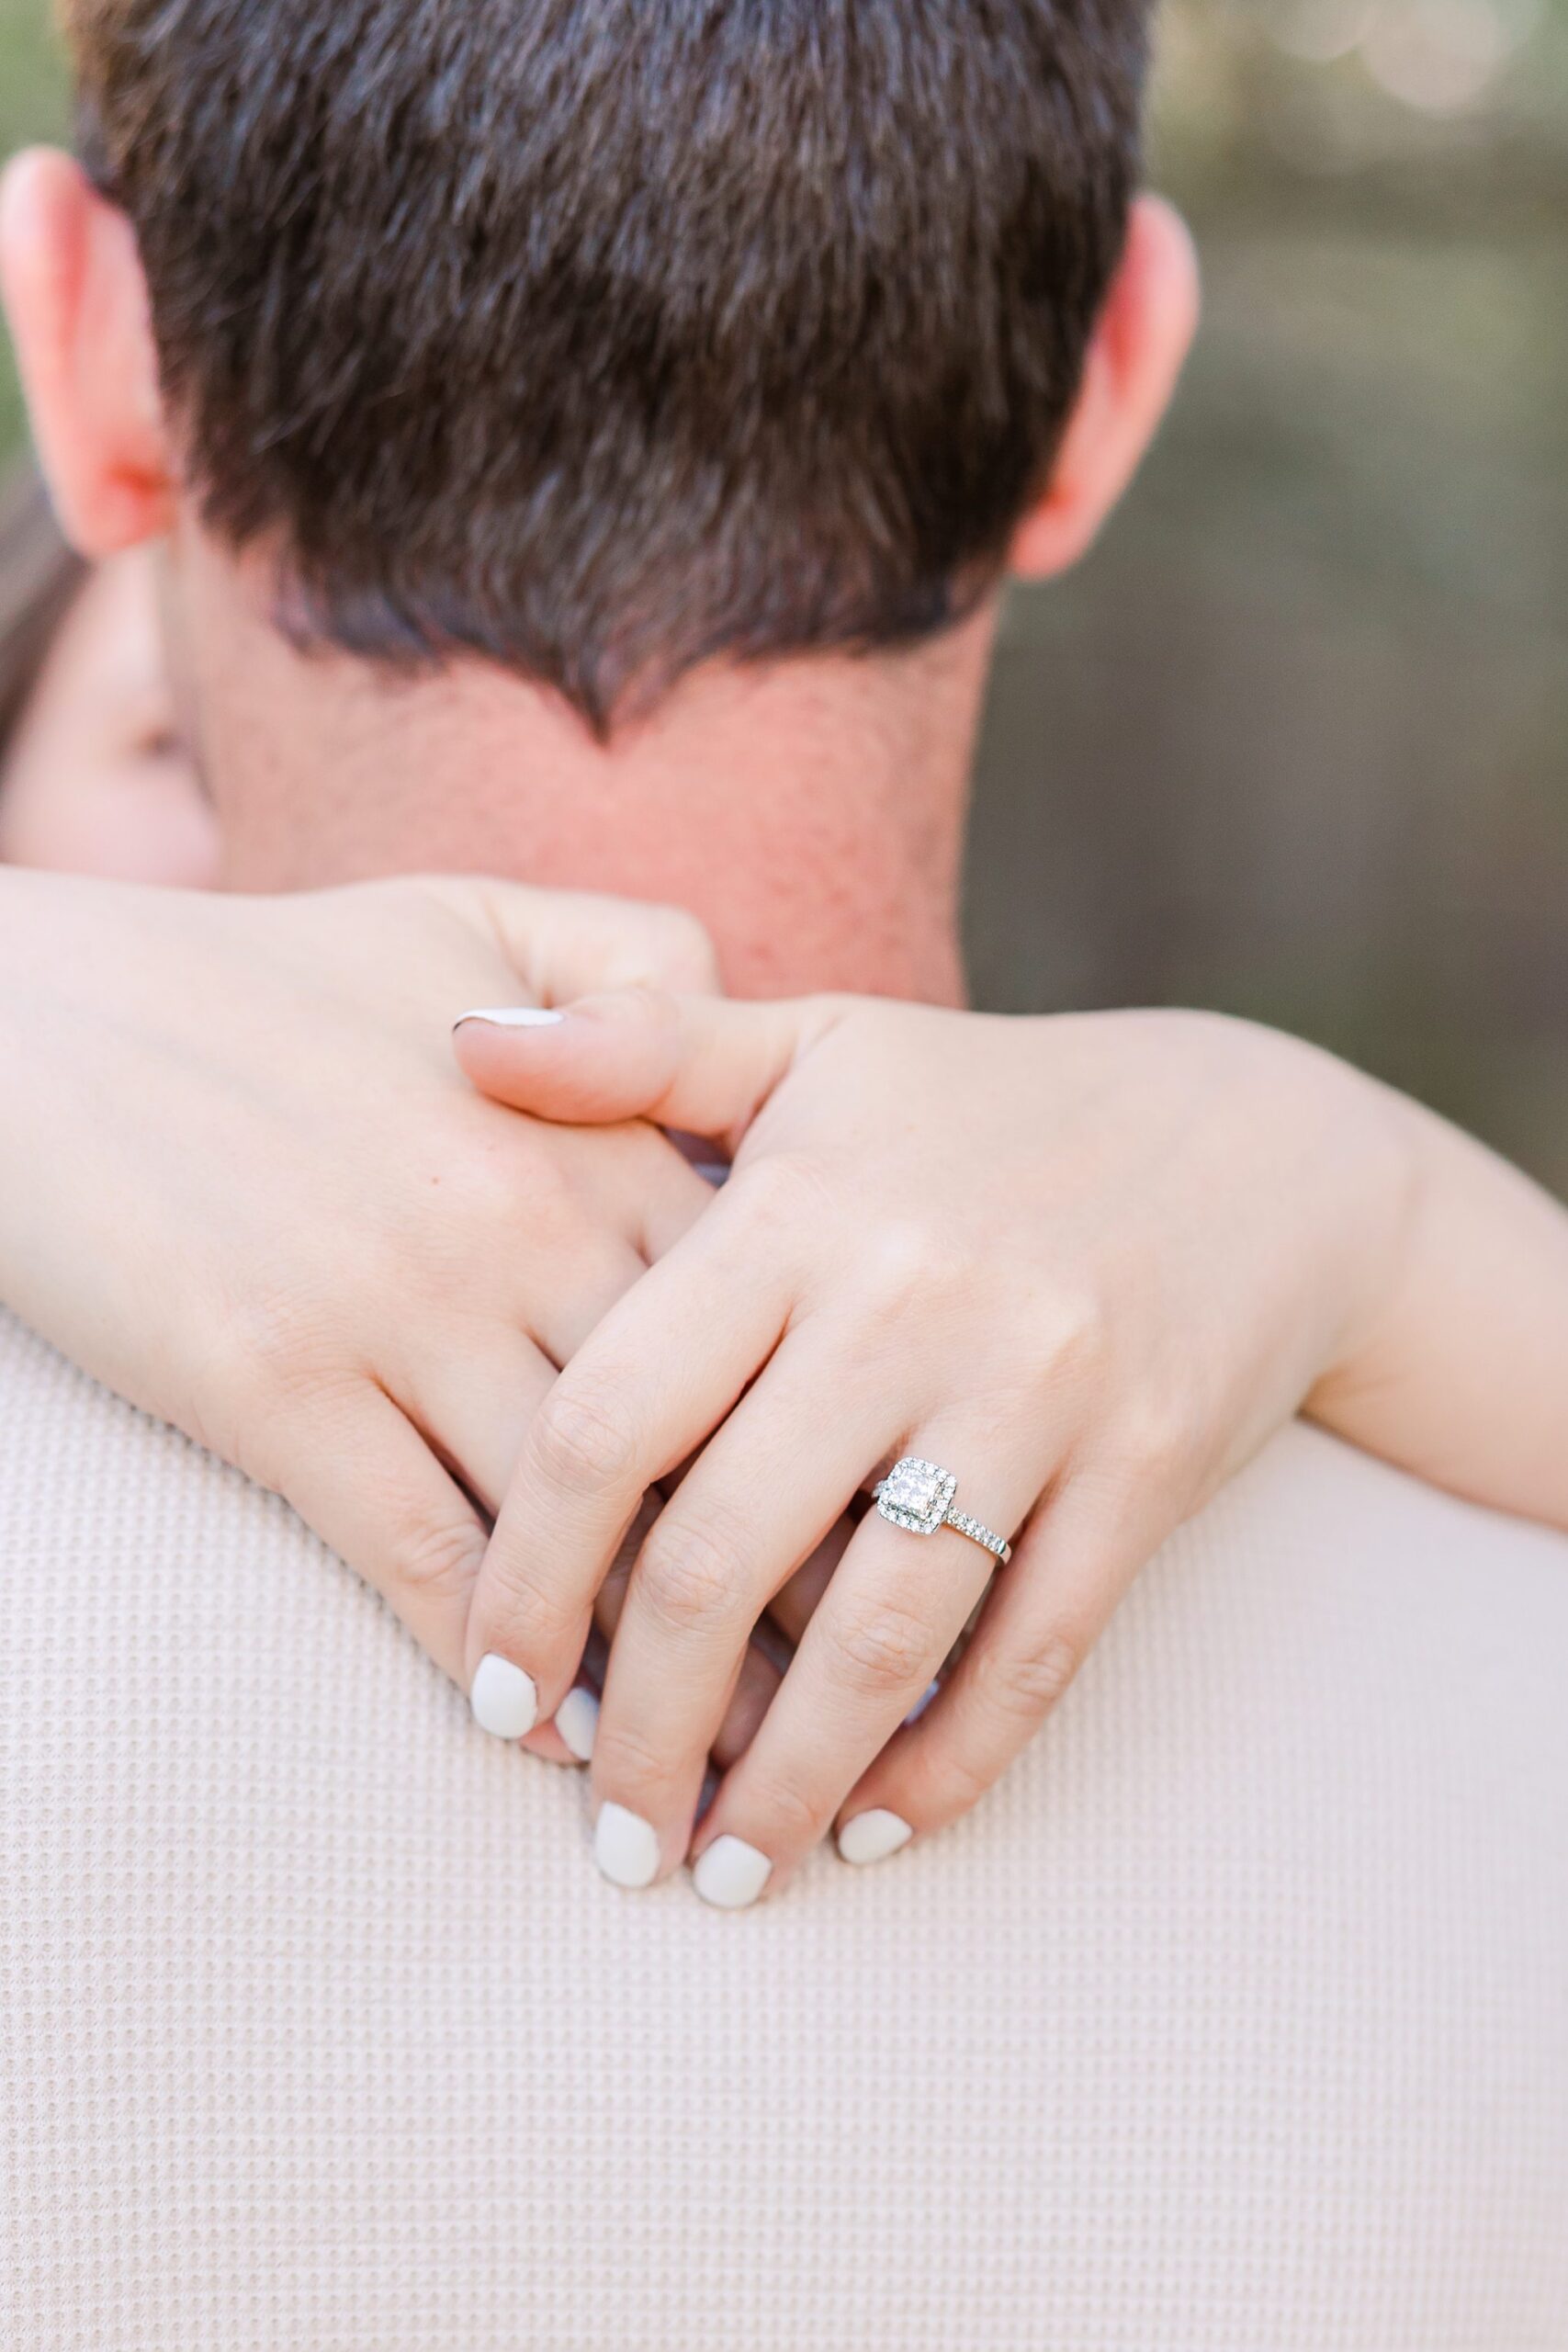 woman hands wrapped around guys neck showing off engagement ring